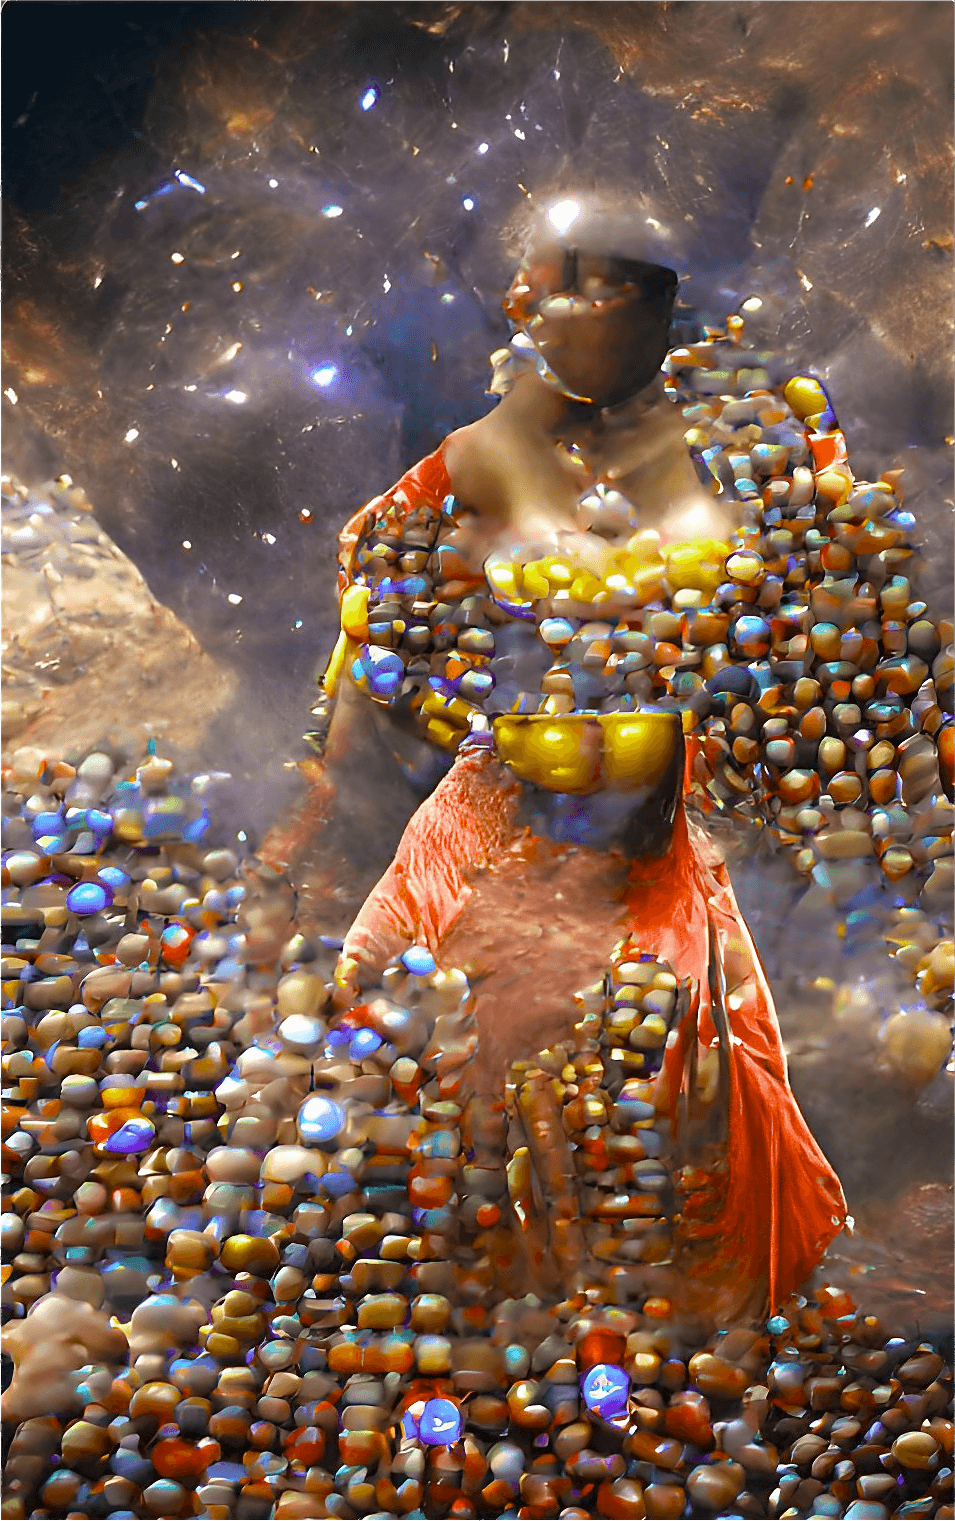 An African Goddess Collects Collapsed Stars To Adorn Her Dress For The Celestial Ball